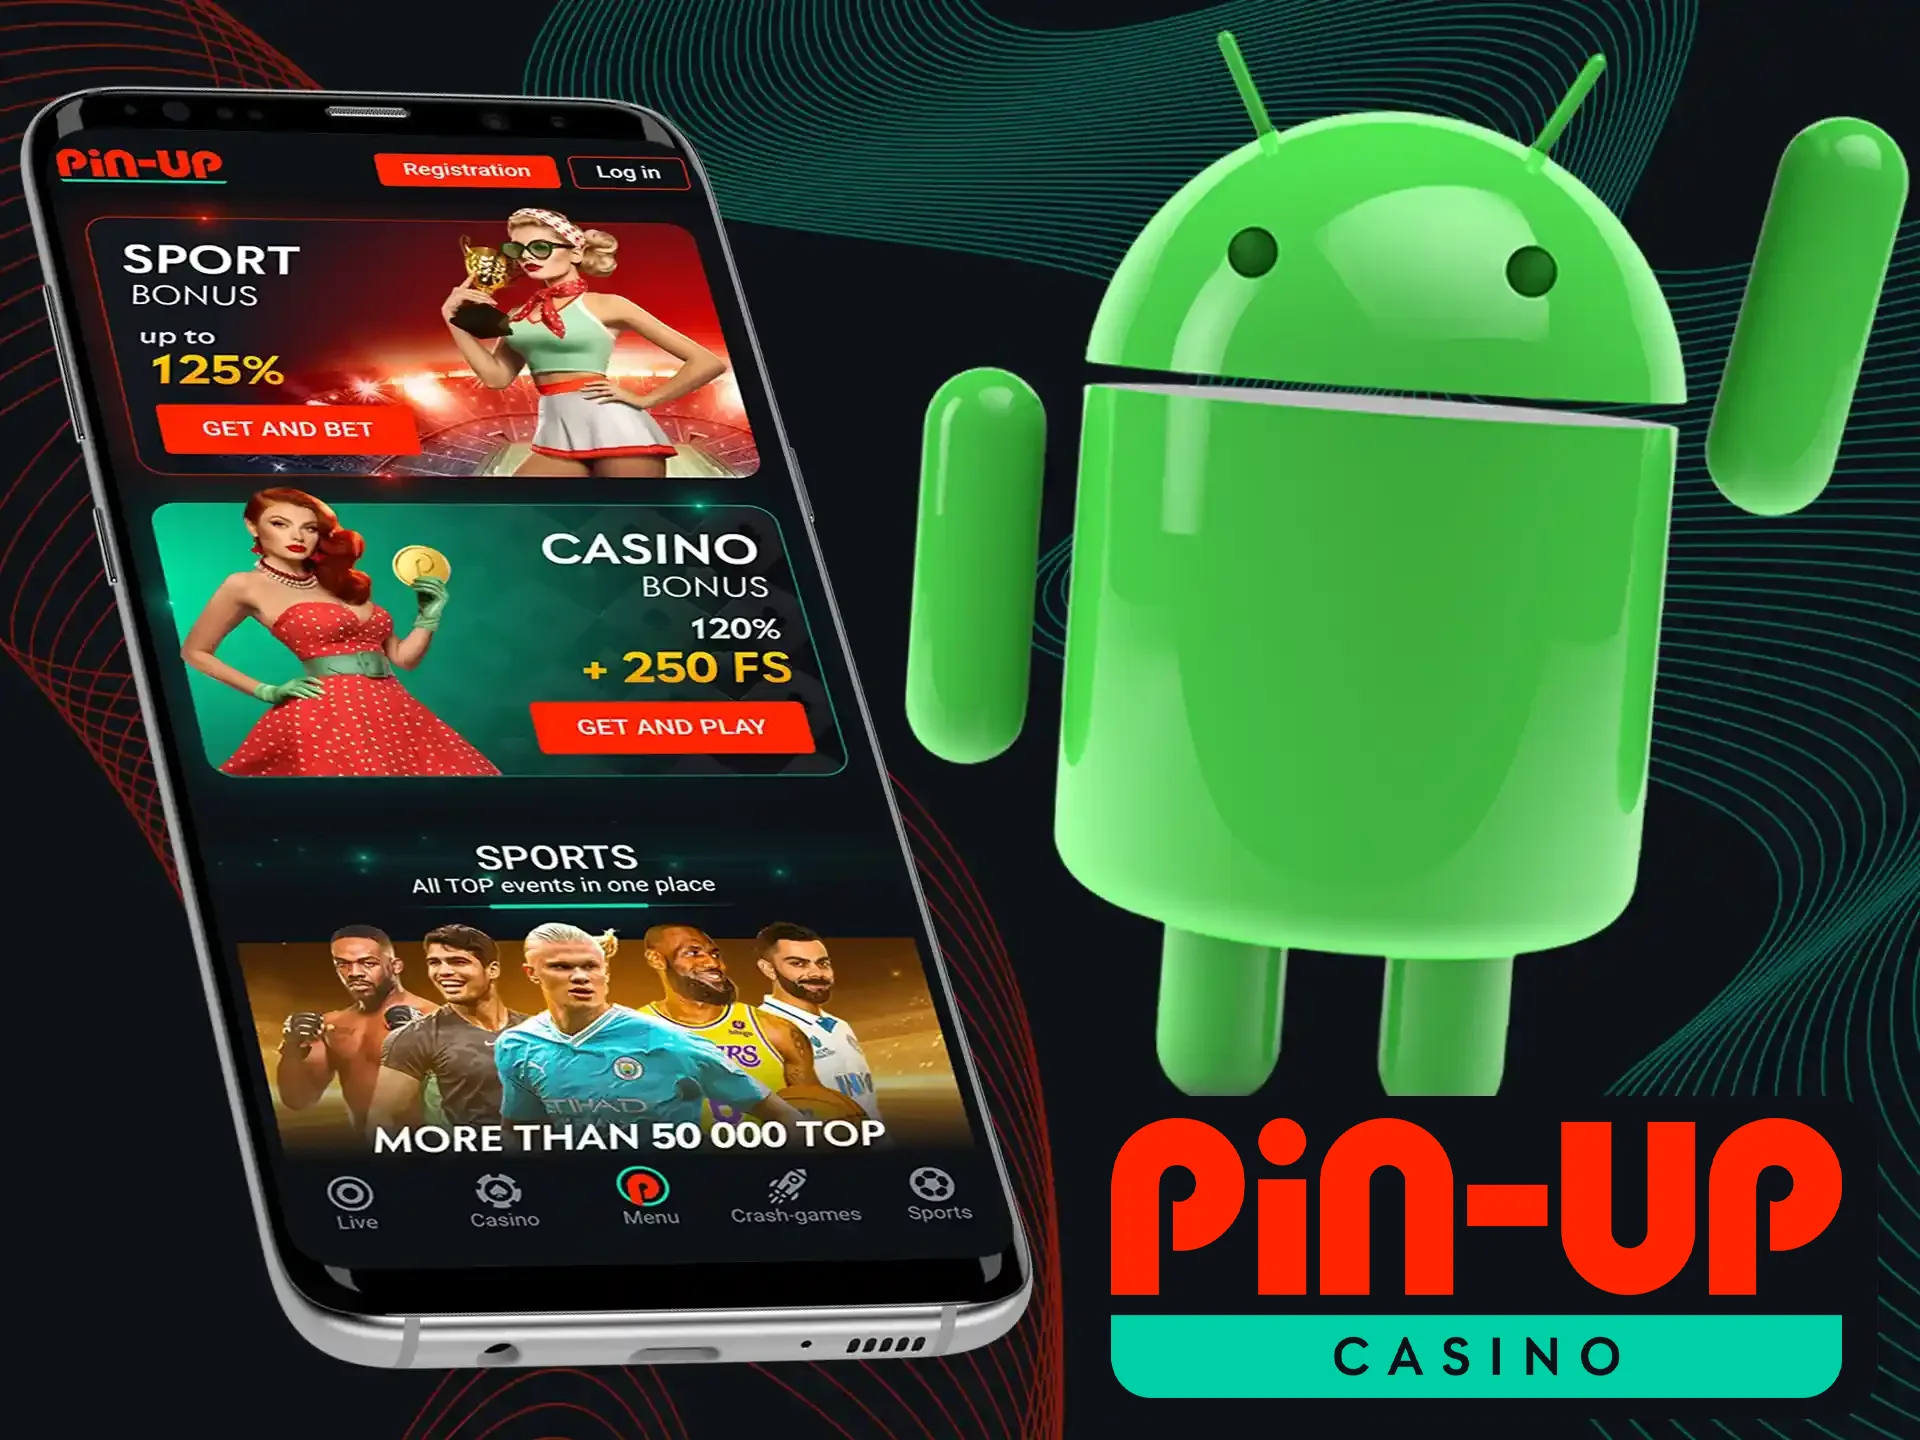 You can play Pin-Up Casino on your Android device.